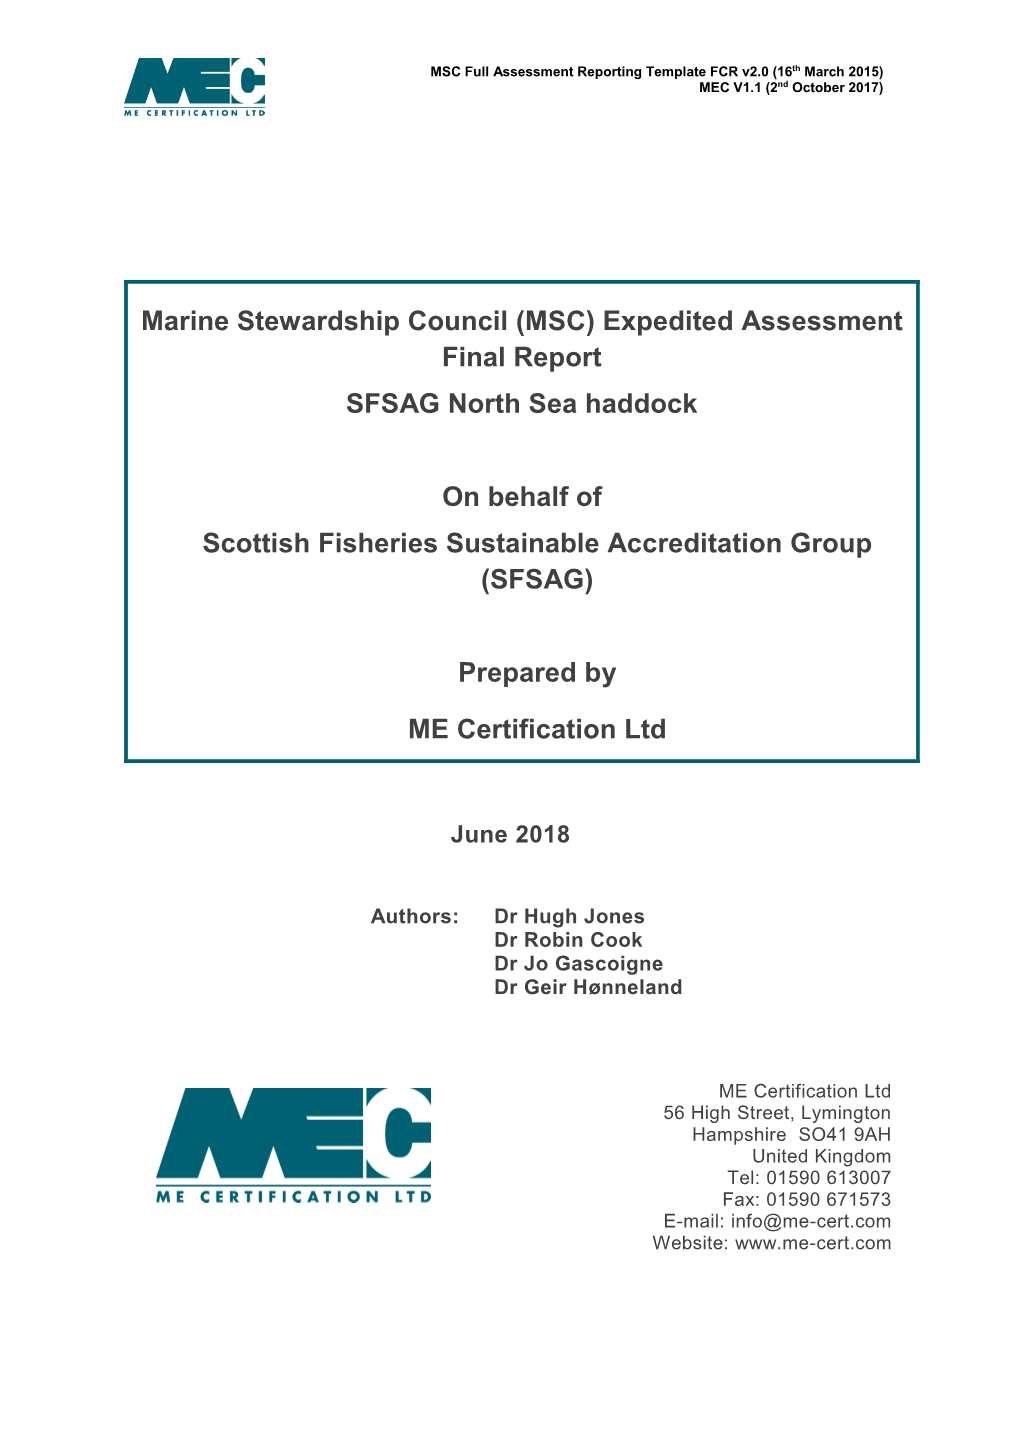 Expedited Assessment Final Report SFSAG North Sea Haddock On